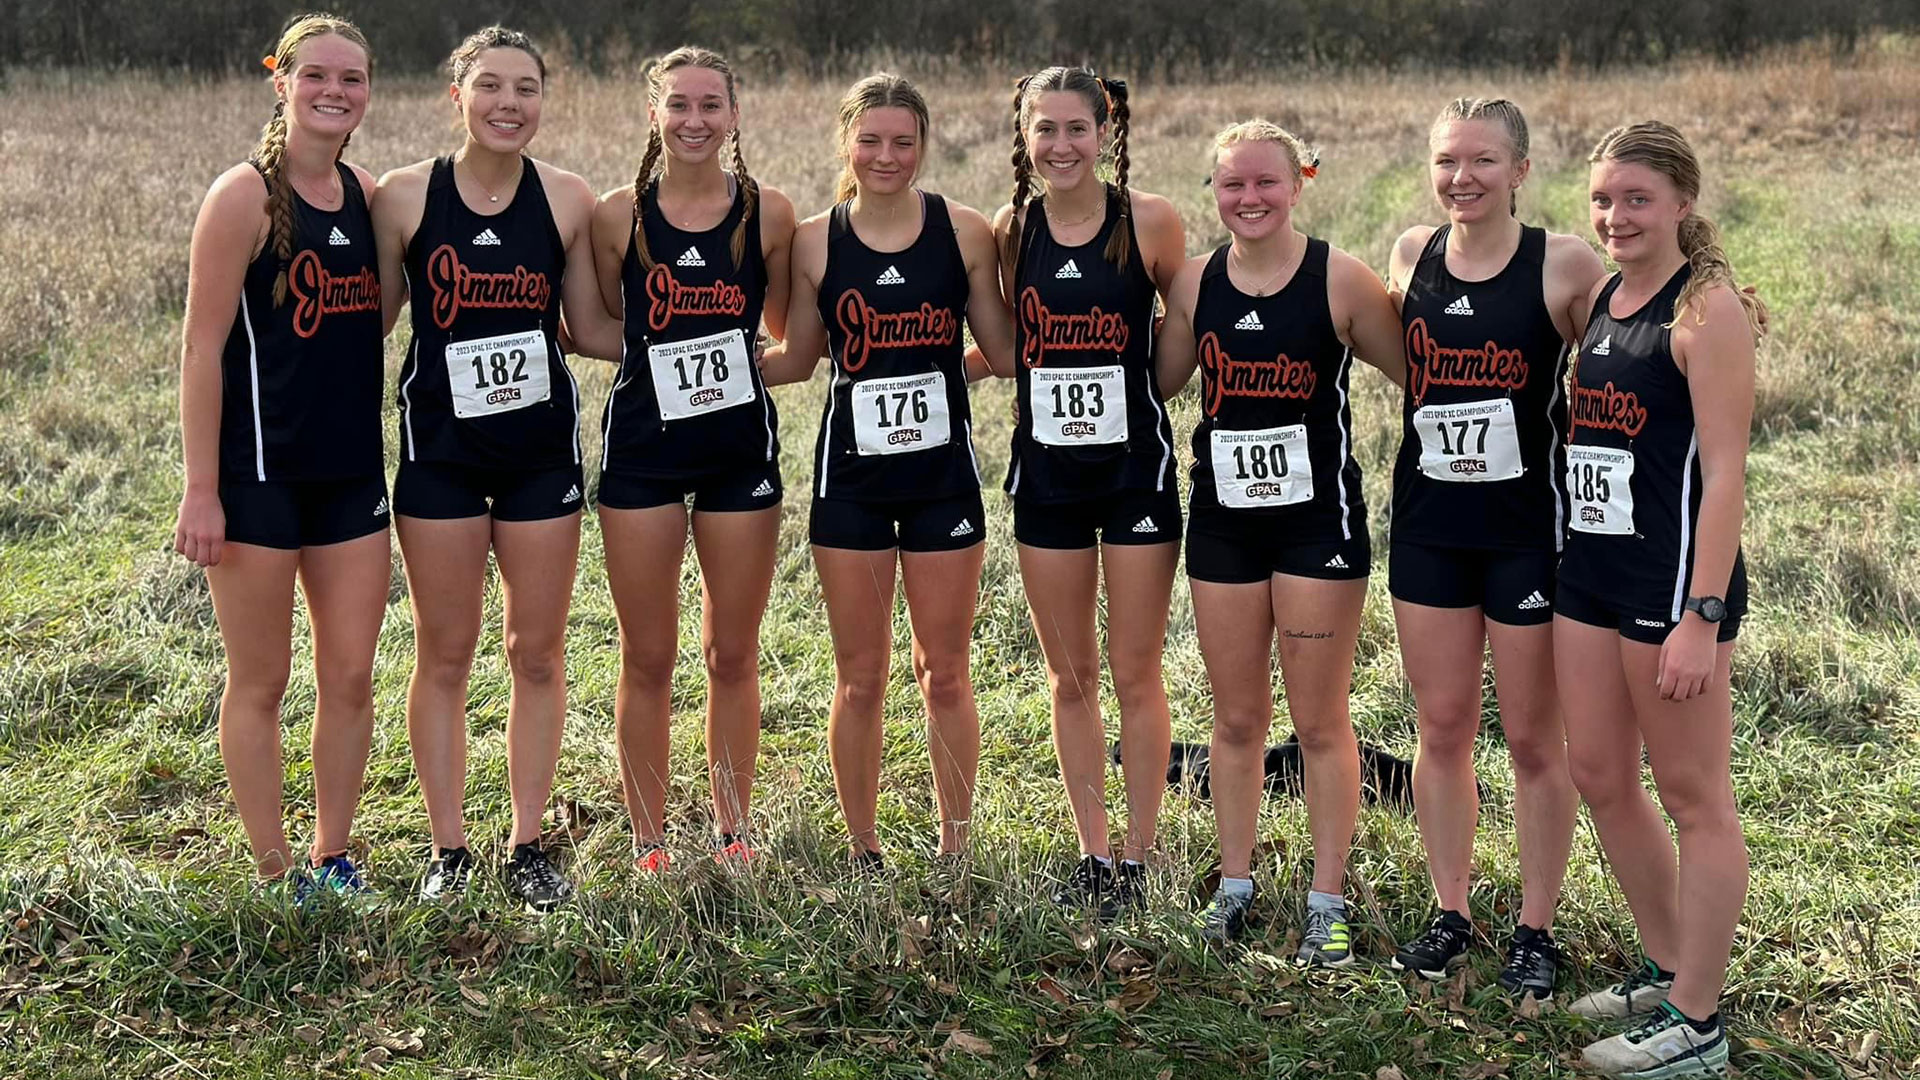 Ten personal bests for Jimmies at GPAC Championships